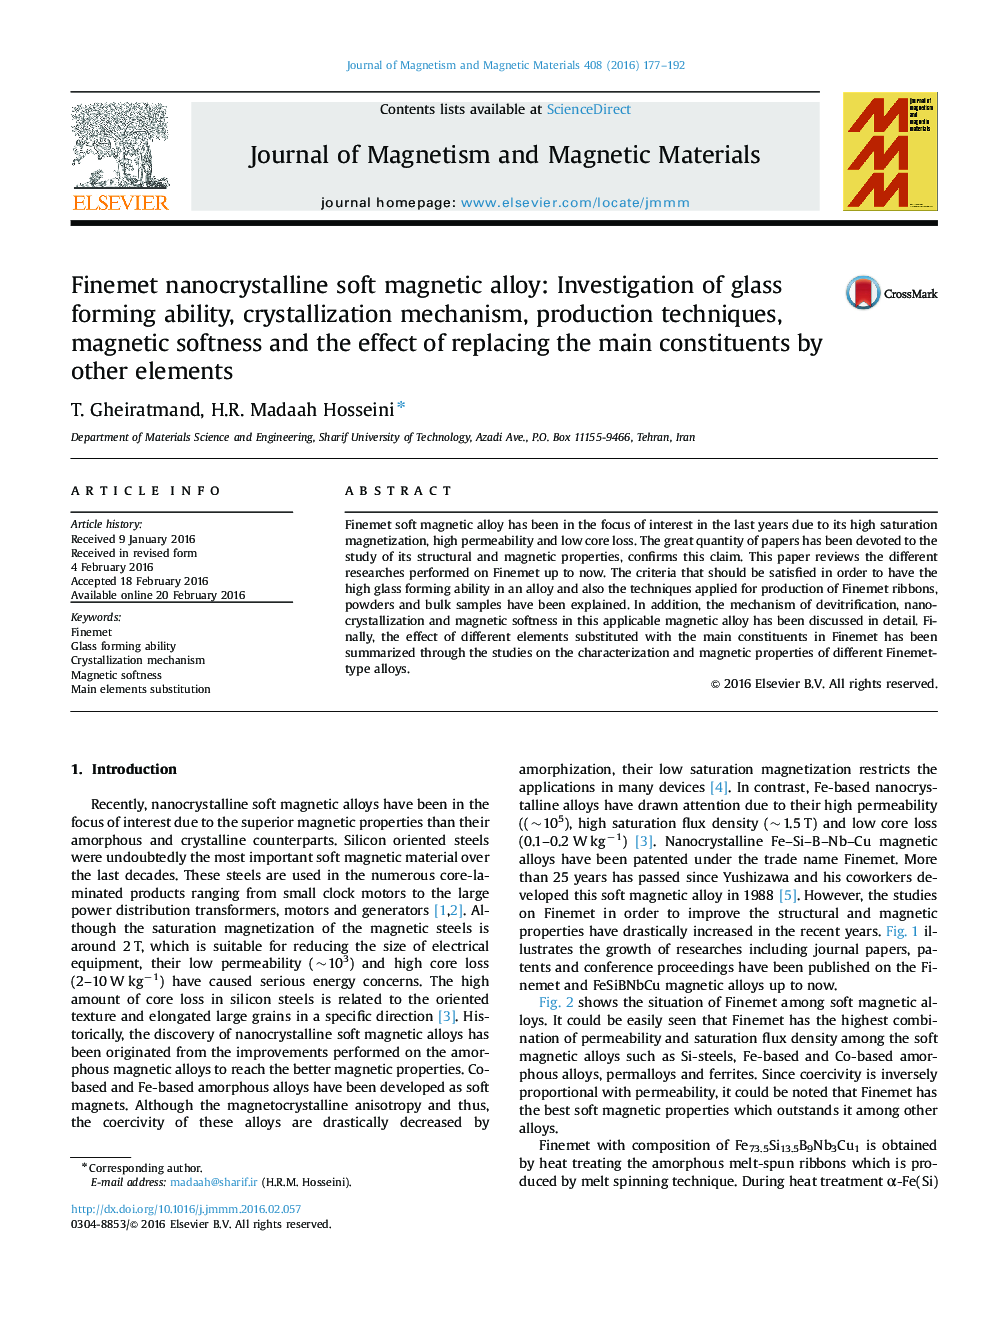 Finemet nanocrystalline soft magnetic alloy: Investigation of glass forming ability, crystallization mechanism, production techniques, magnetic softness and the effect of replacing the main constituents by other elements